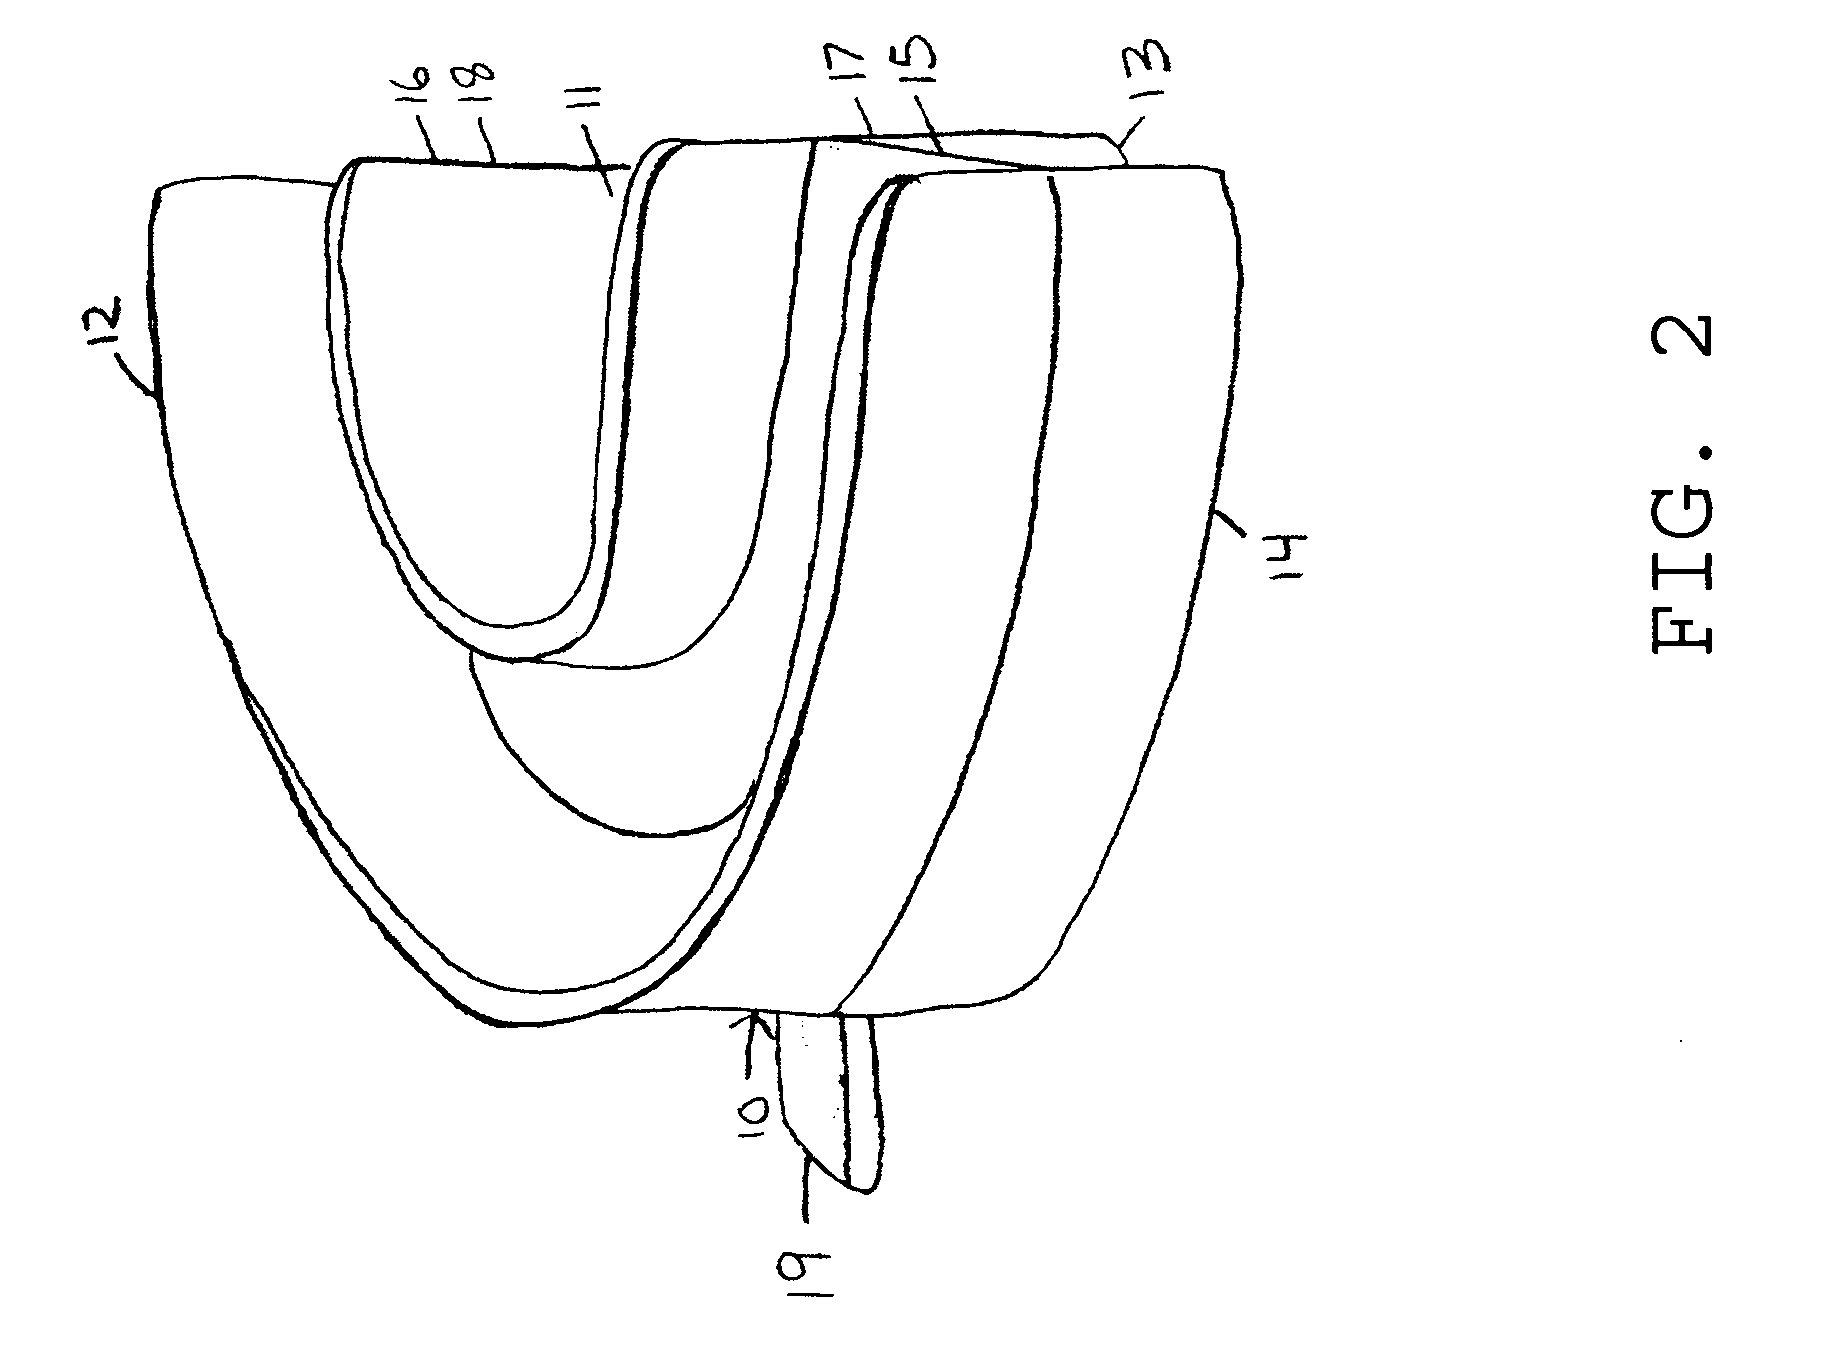 Multi-sulcus flossing device